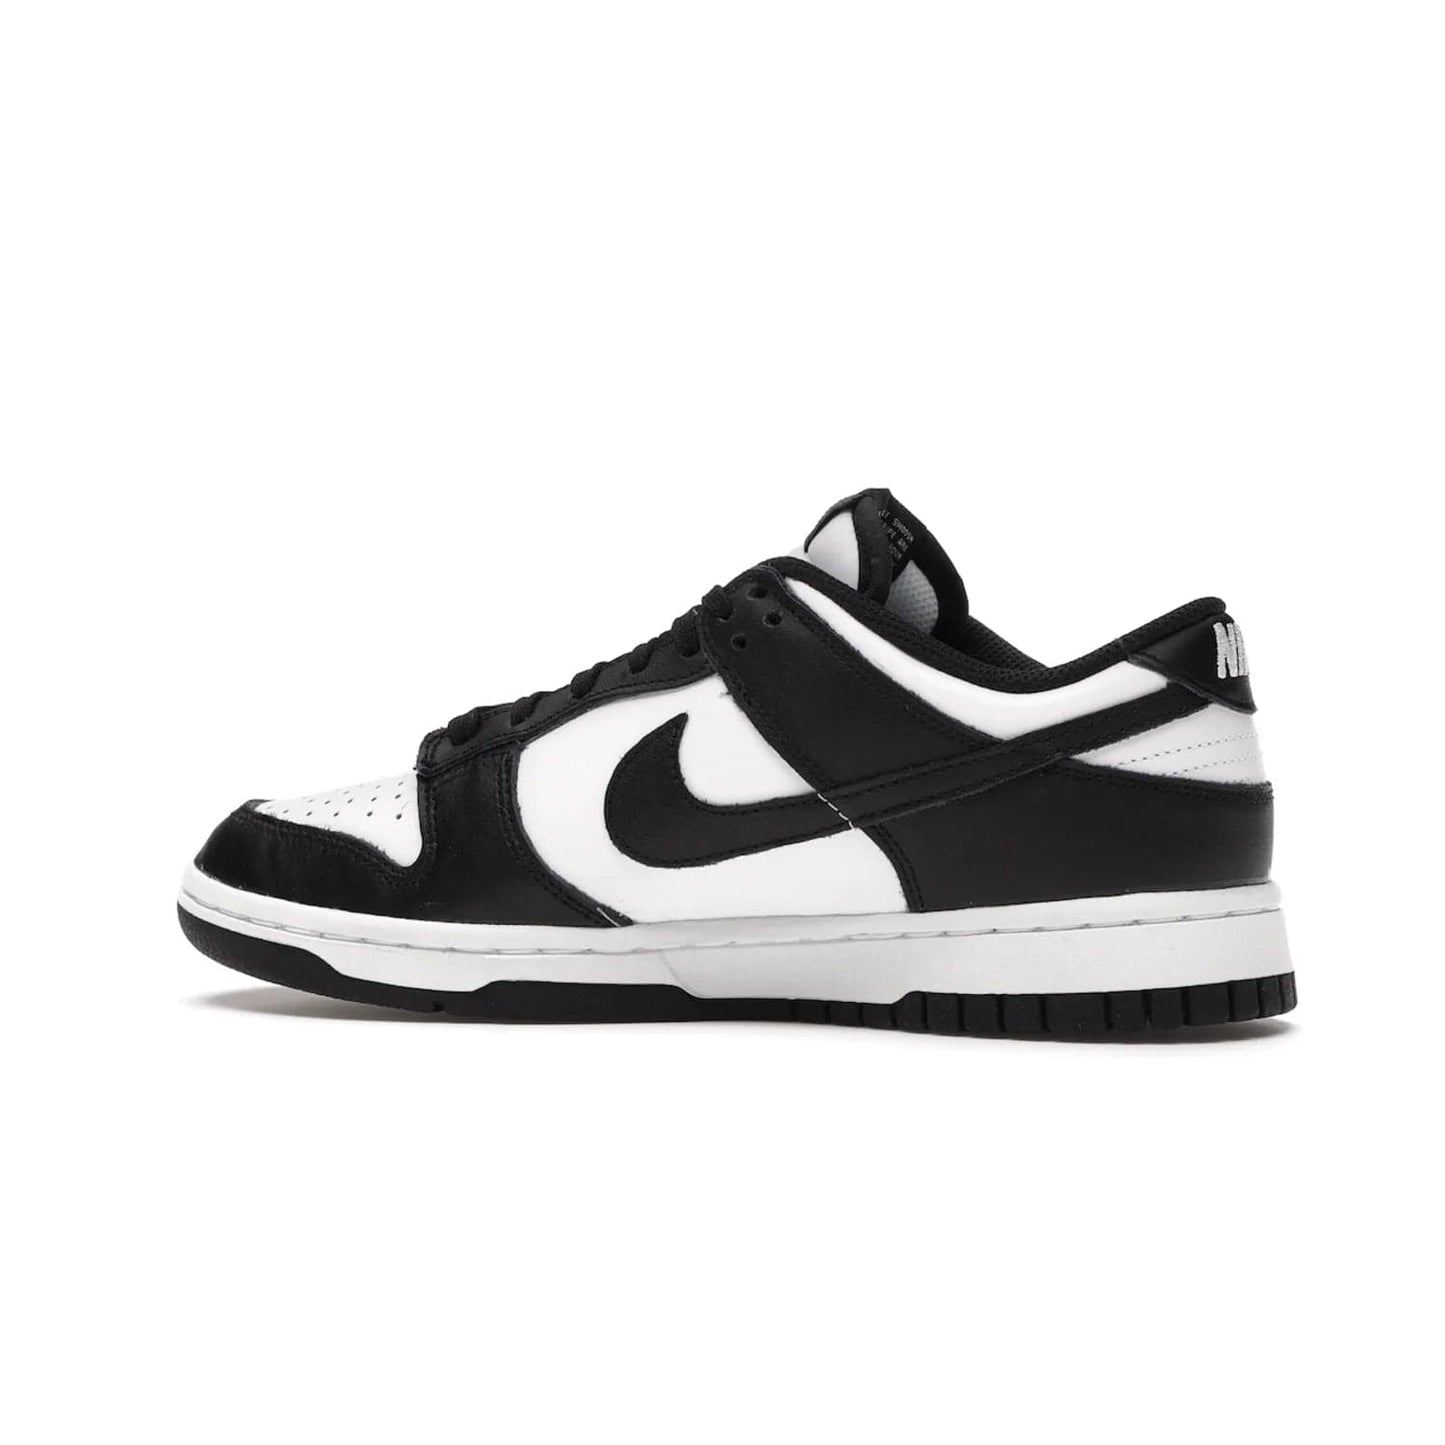 Nike Dunk Low Retro White Black Panda (2021) (Women's) - Image 21 - Only at www.BallersClubKickz.com - Say hello to the new Nike Dunk Low Retro White Black Panda (2021) (Women's)! White & black leather upper with Nike Swoosh logo. Get your pair for $100 in March 2021! Shop now!